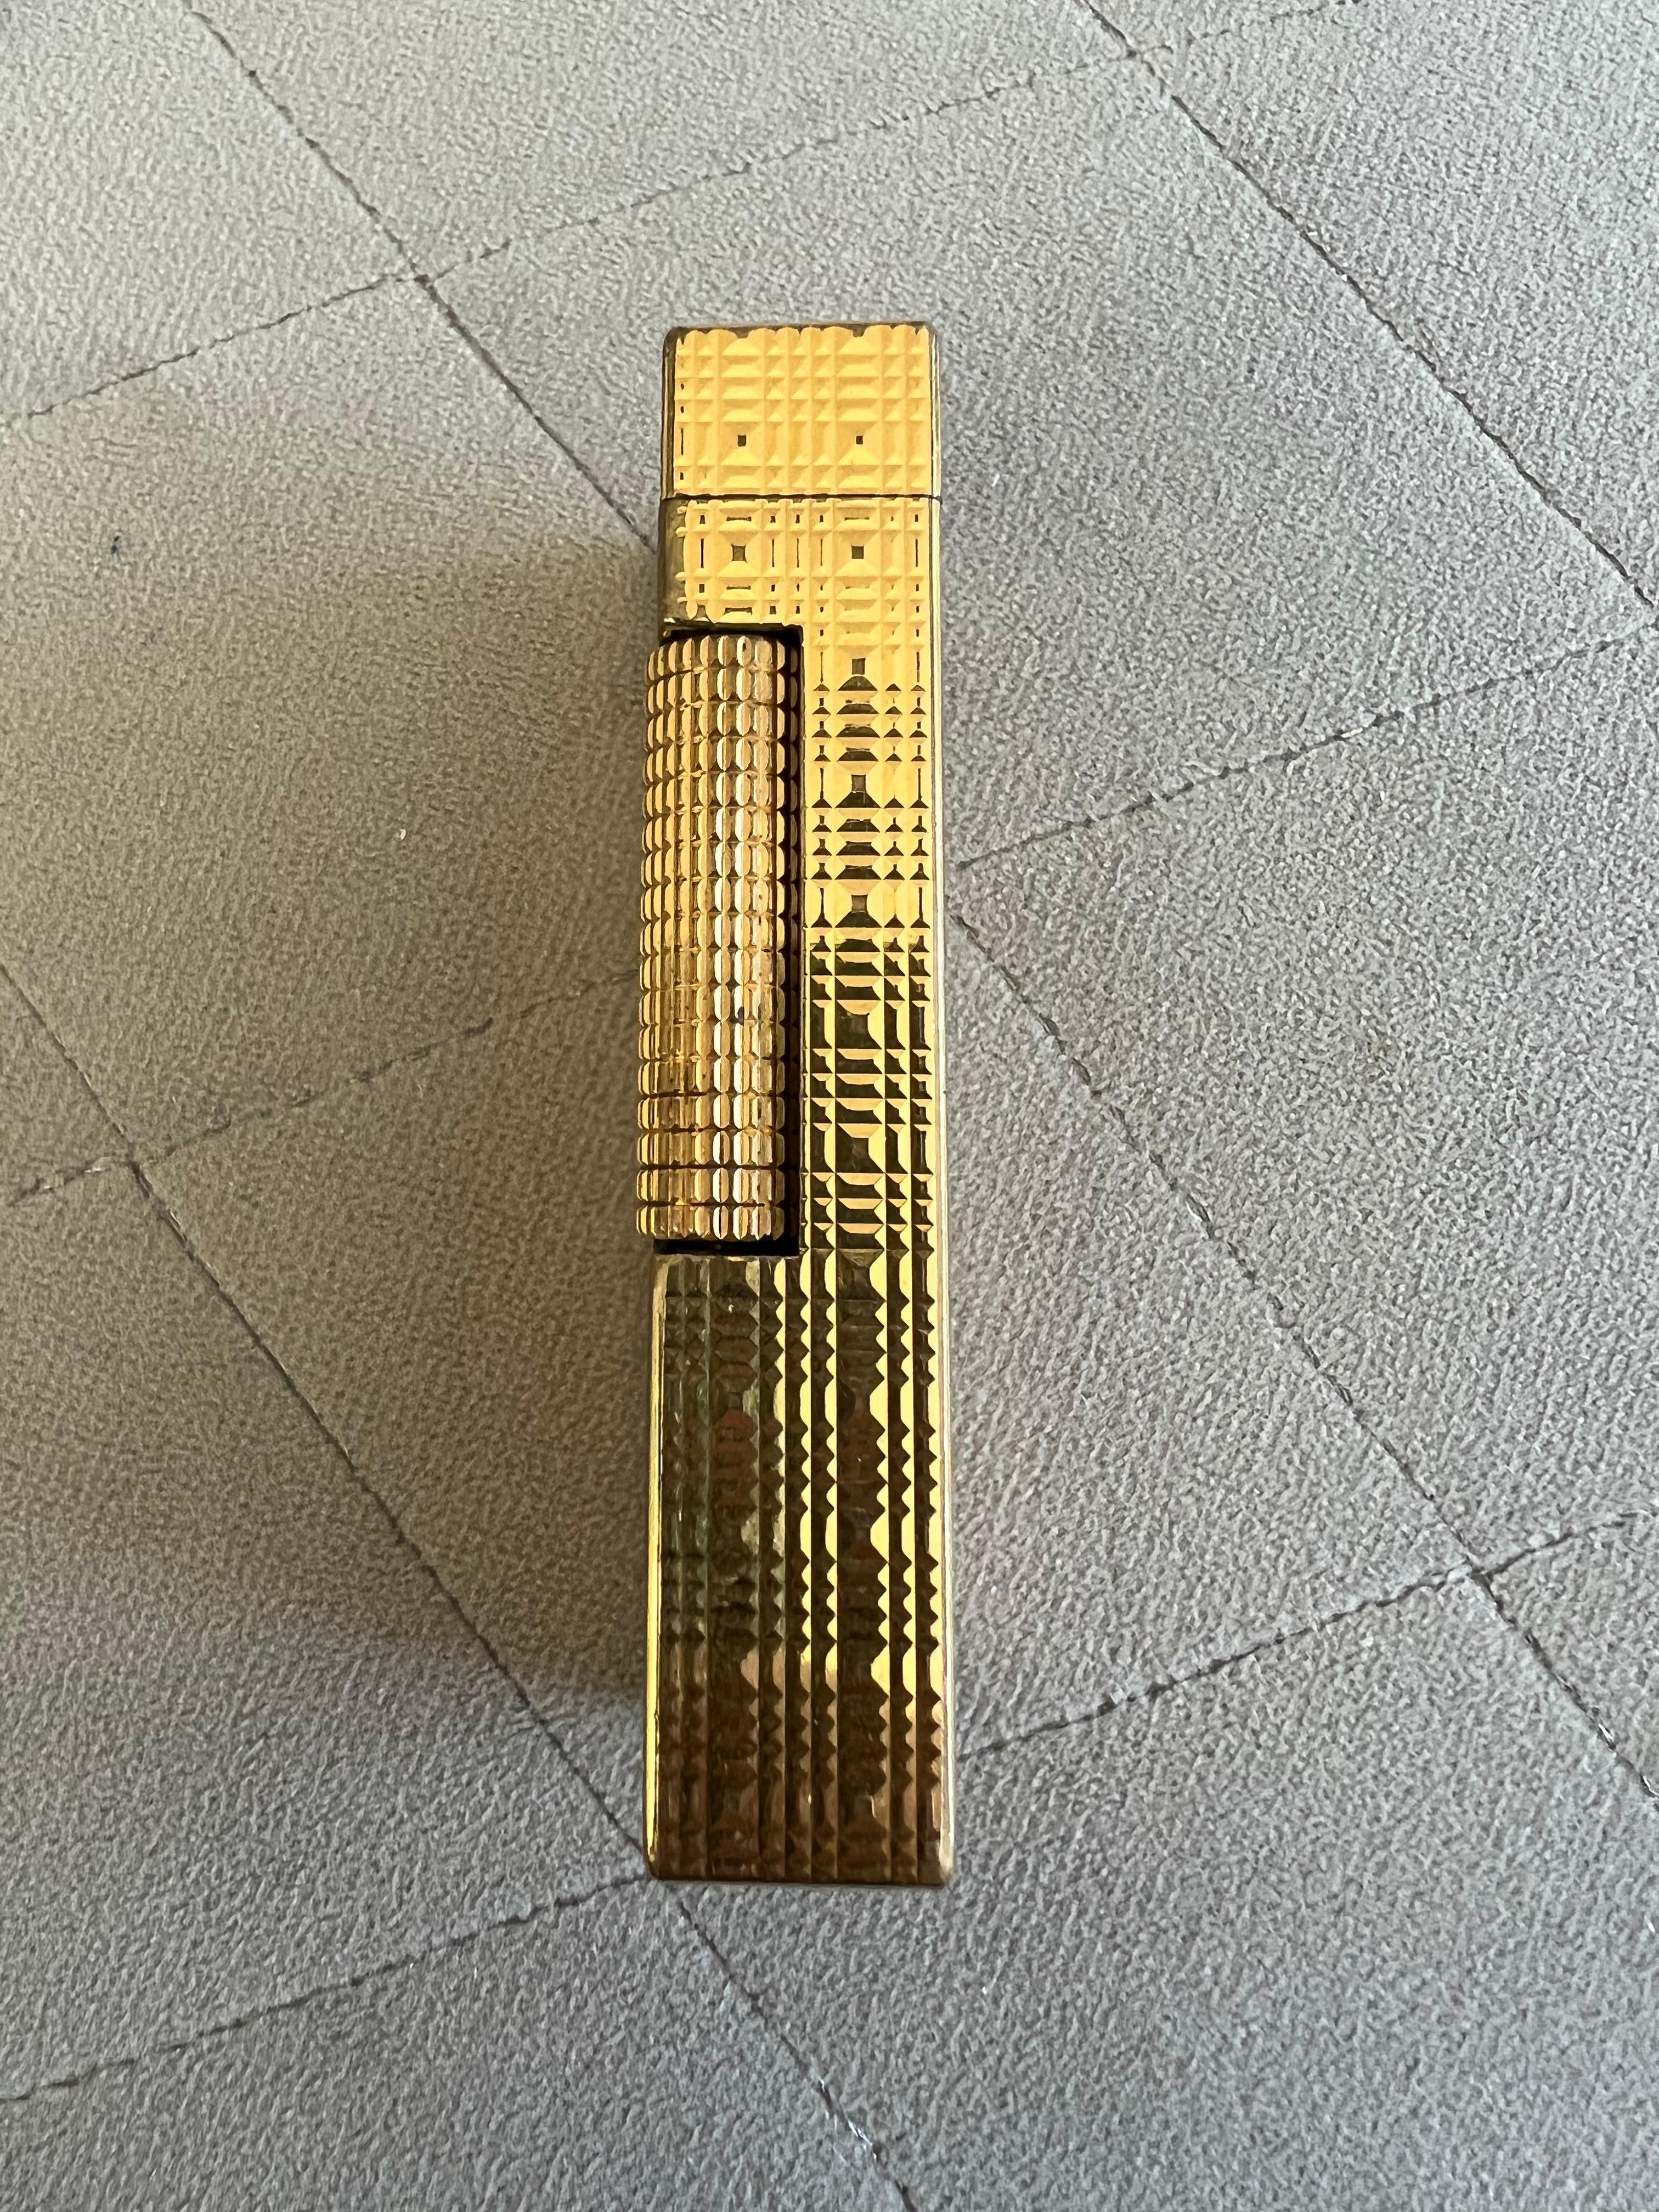 A Dunhill gold-plated mid century cigarette lighter, barley engine turned design. Mid-Century Modern Lighter by Dunhill Rollagas Rulerlite, c1970 in mint condition.  
Almost as new.  Please
 note that the lighters can not be shipped with fluid.